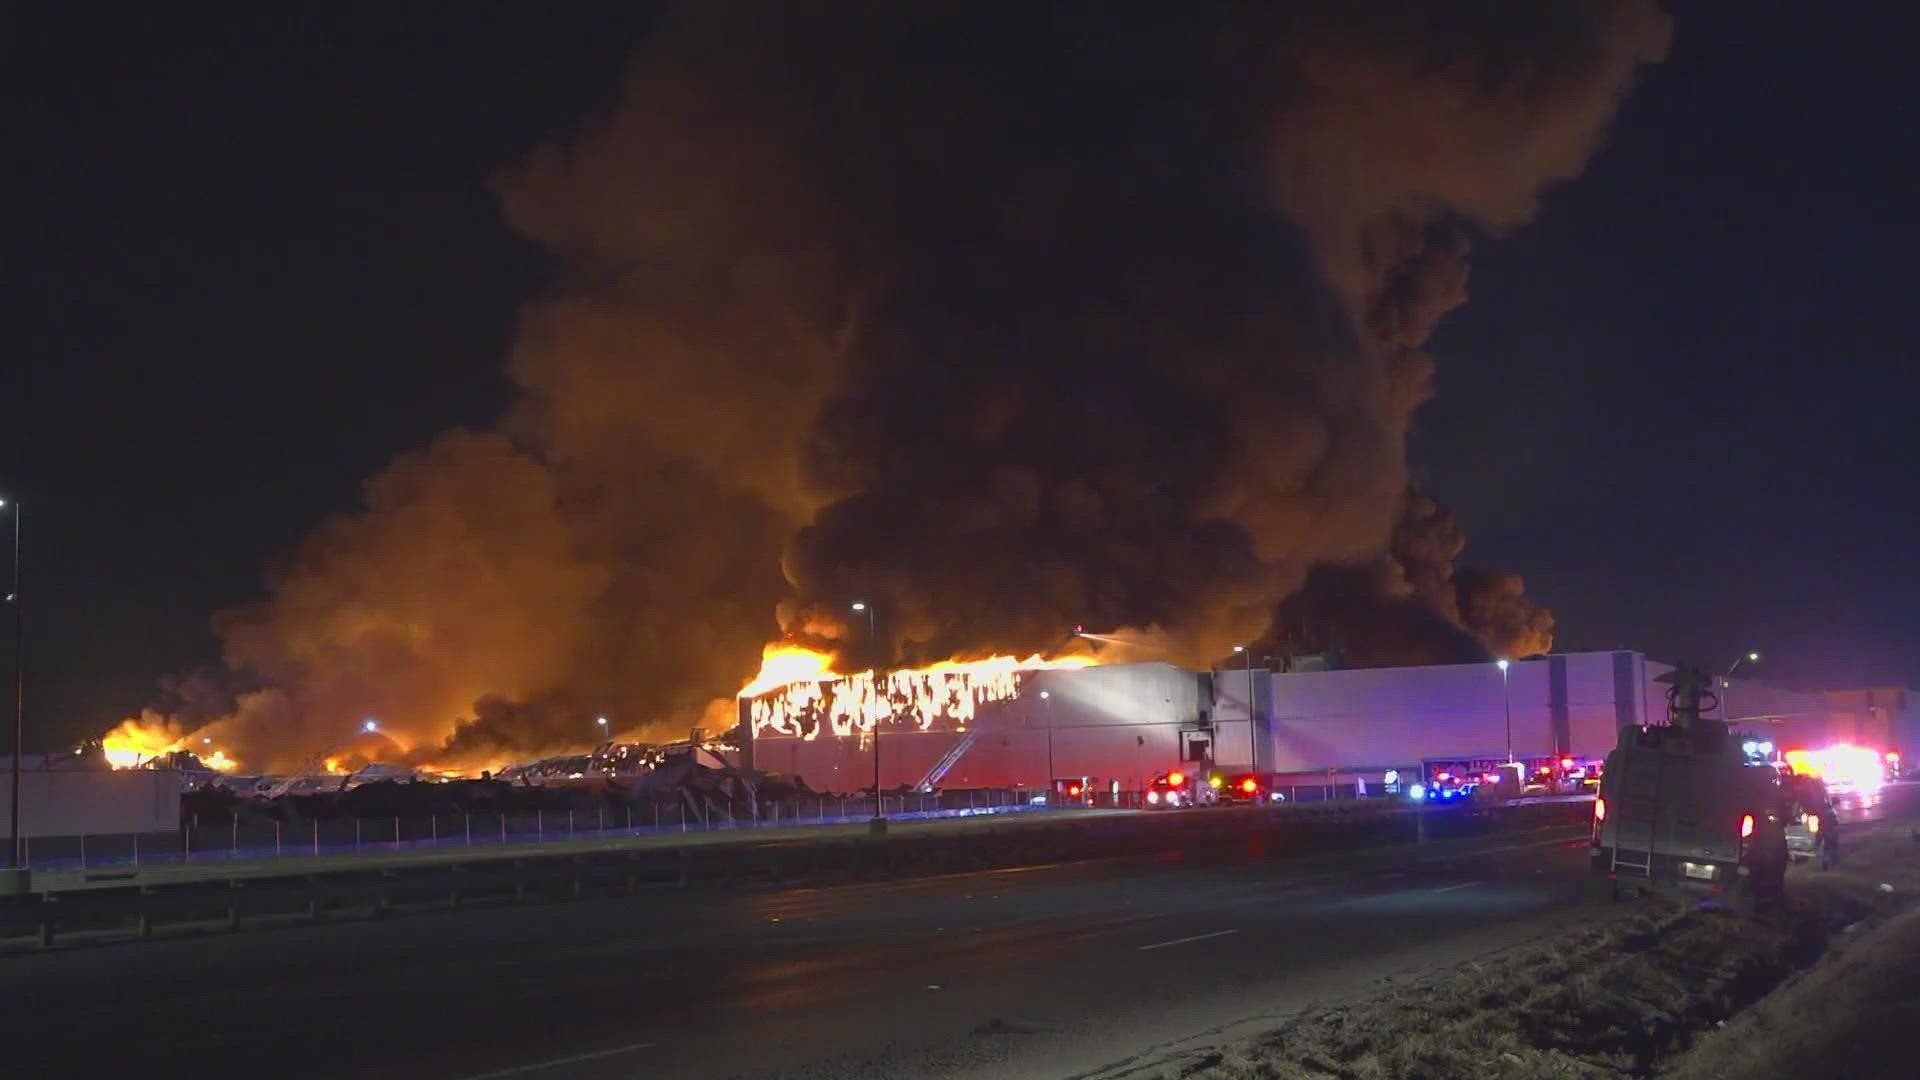 Dallas-Fire Rescue said units were assigned to the fire at 5:28 a.m. Tuesday after multiple reports of a fire coming from a warehouse.